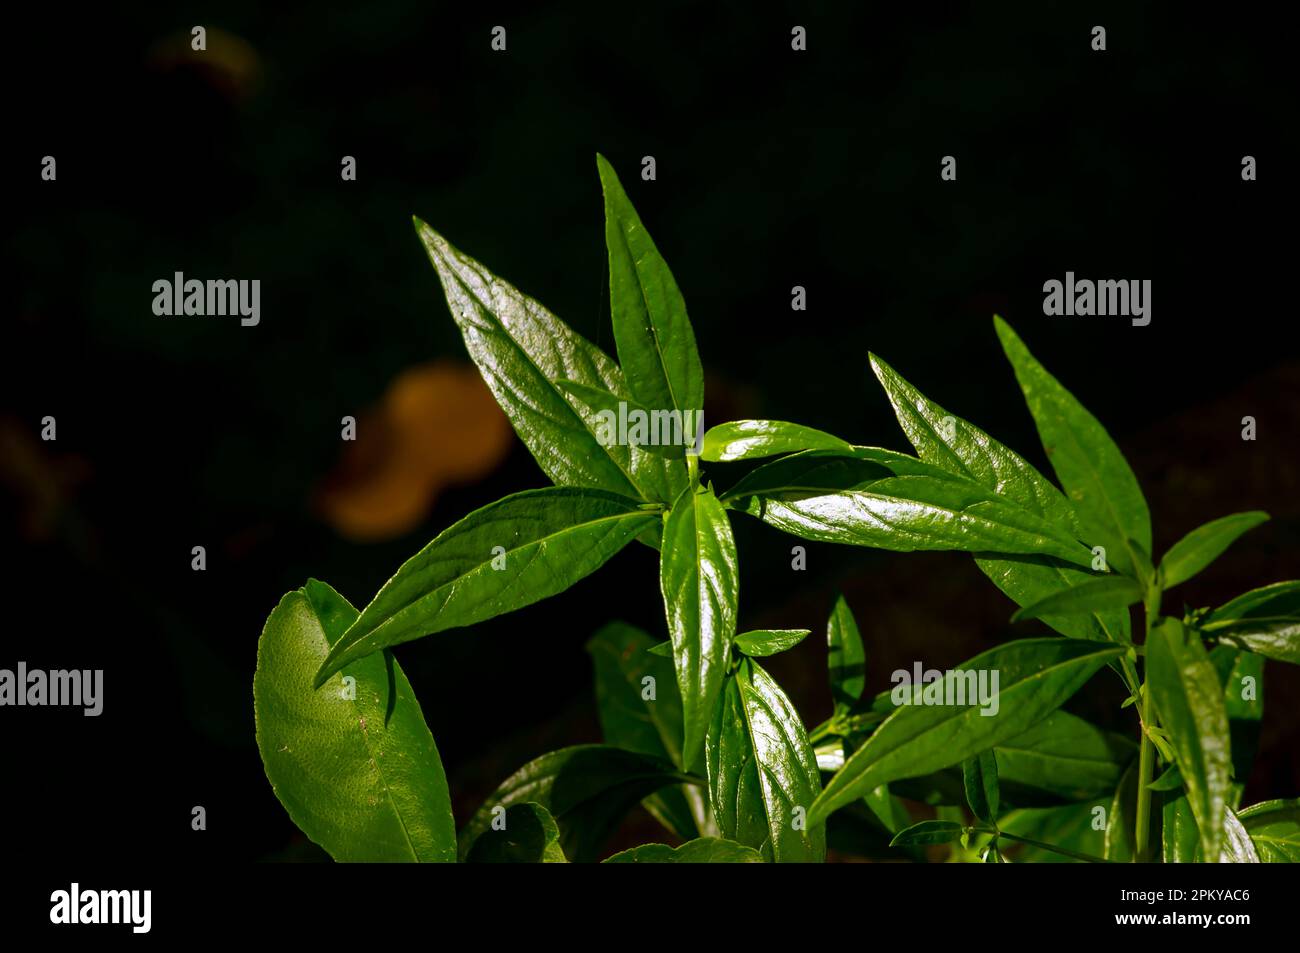 Sambiloto (Andrographis paniculata), King of bitters, a herbal plant grows and easy to find in Indonesia Stock Photo